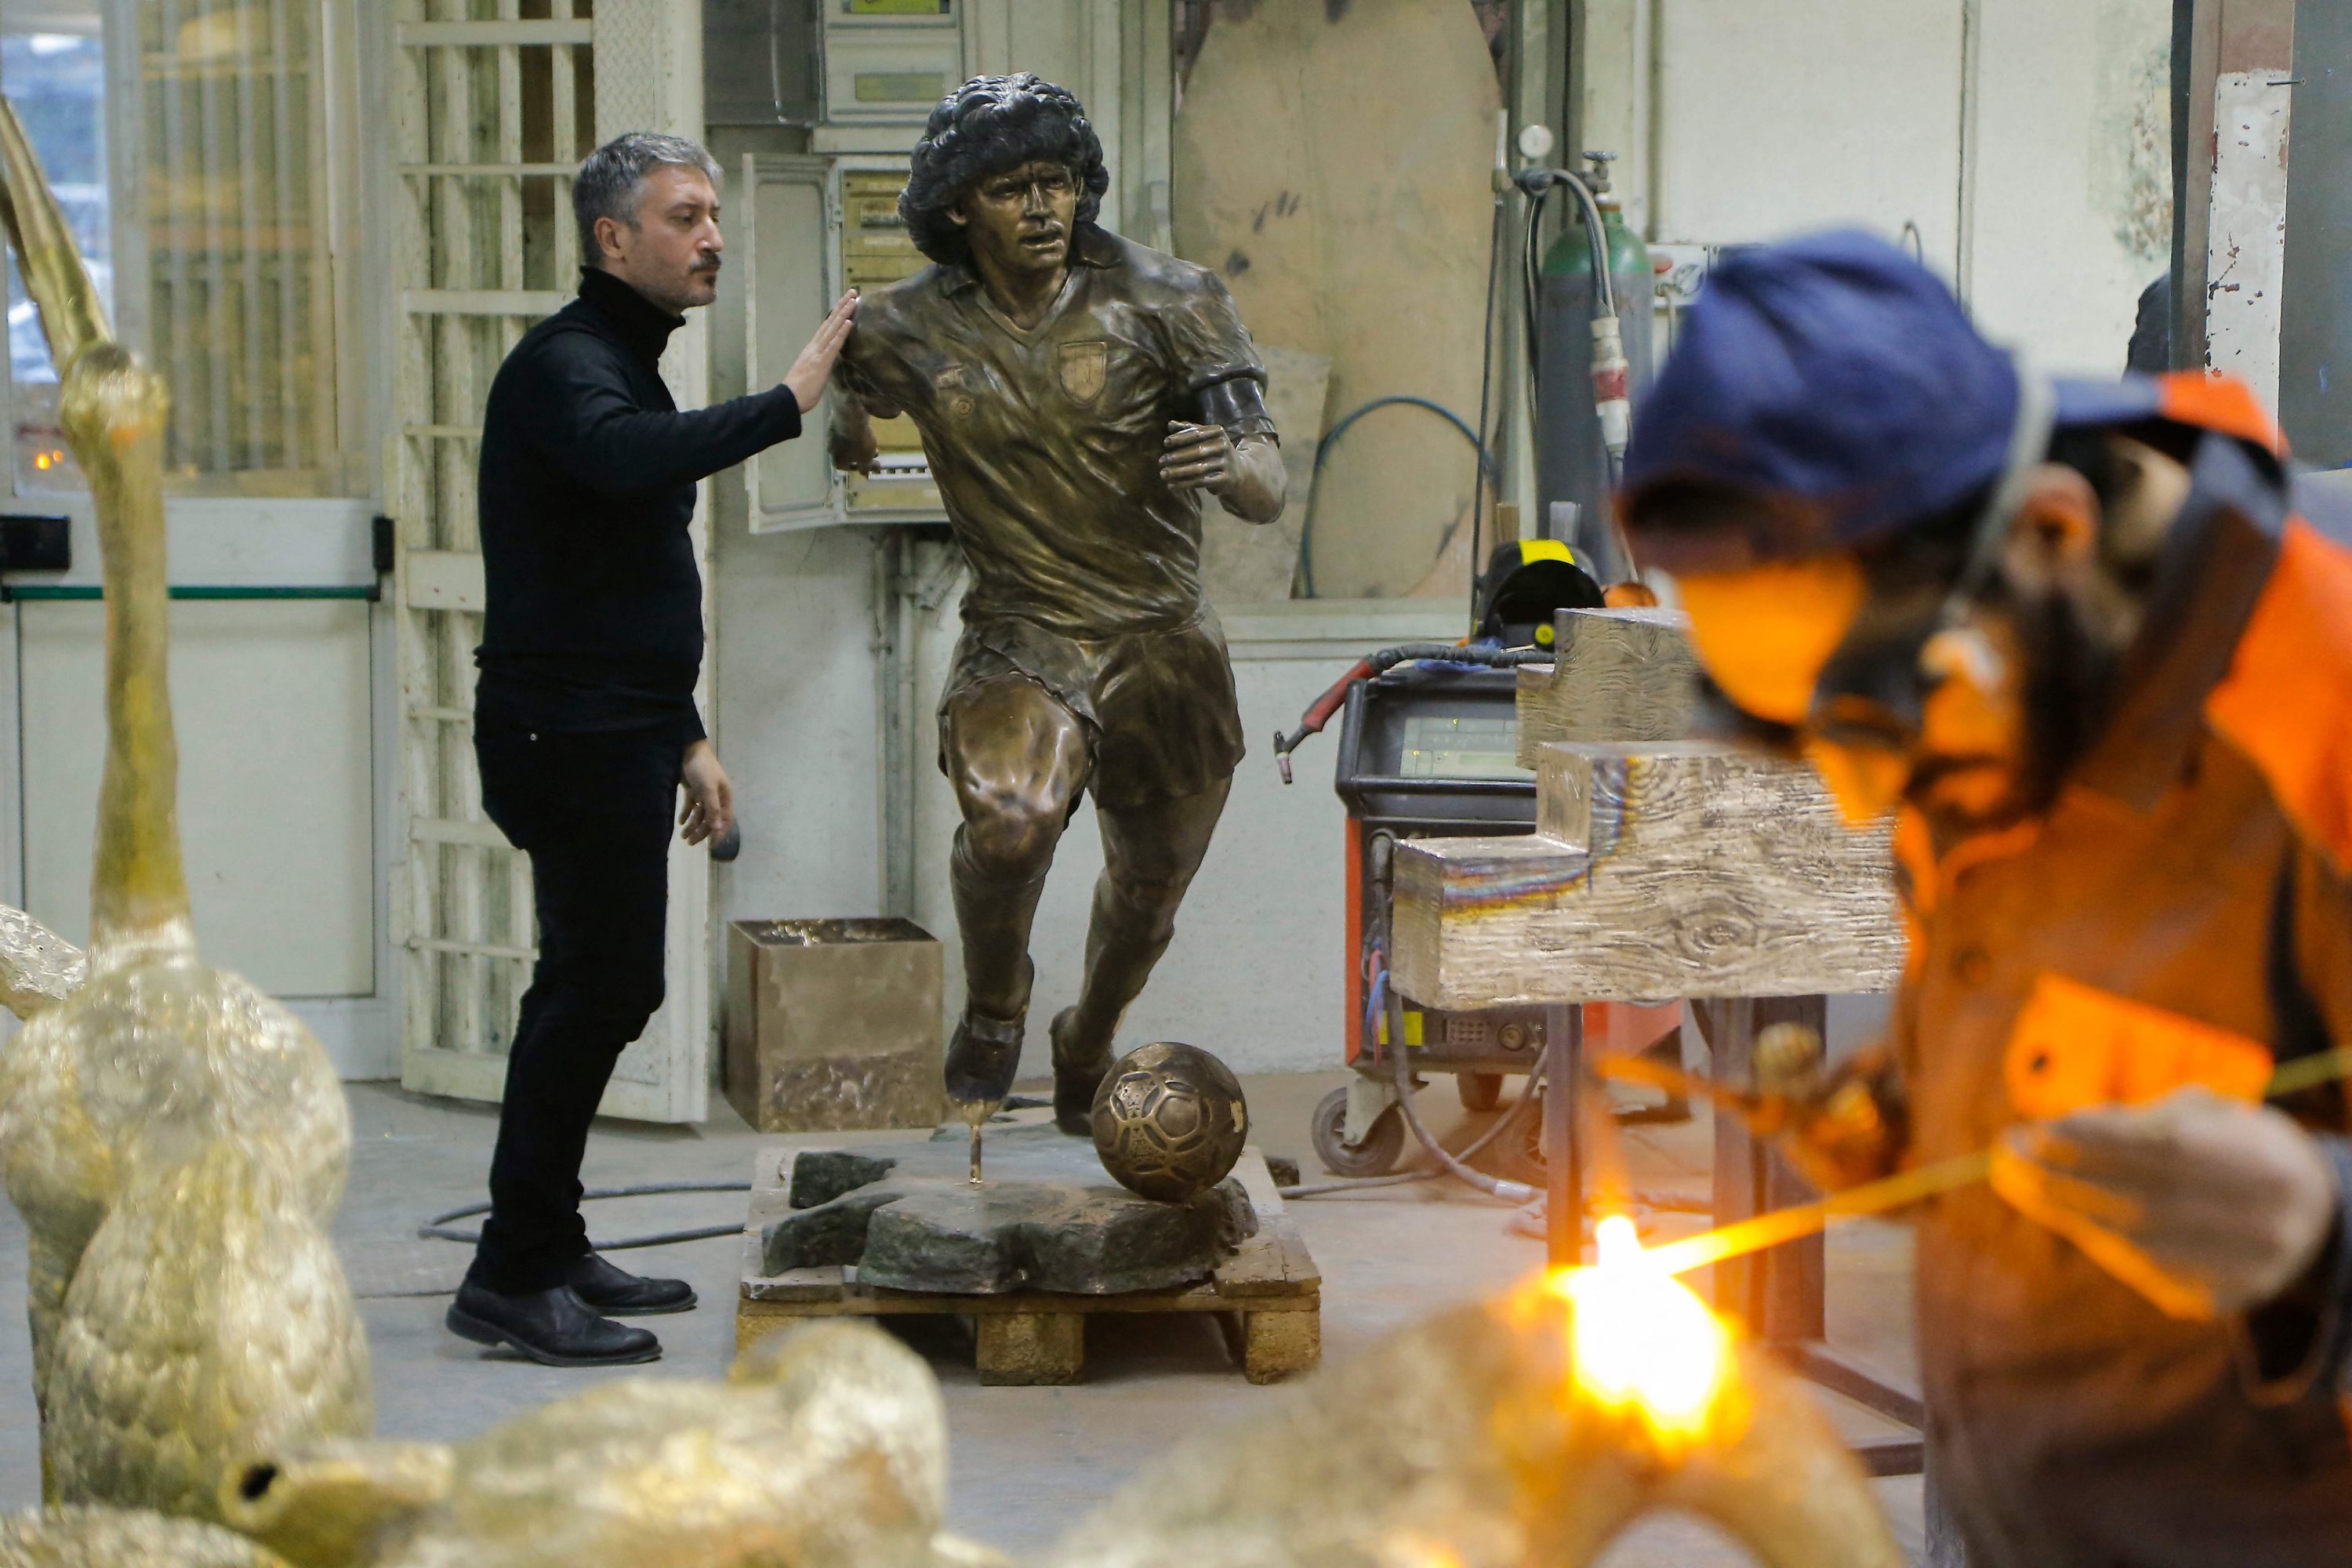 A welder works (R) as Italian sculptor Domenico Sepe touches a life-size bronze statue of the late Argentine football legend Diego Maradona, Naples, Italy, Nov. 22, 2021. (AFP Photo)